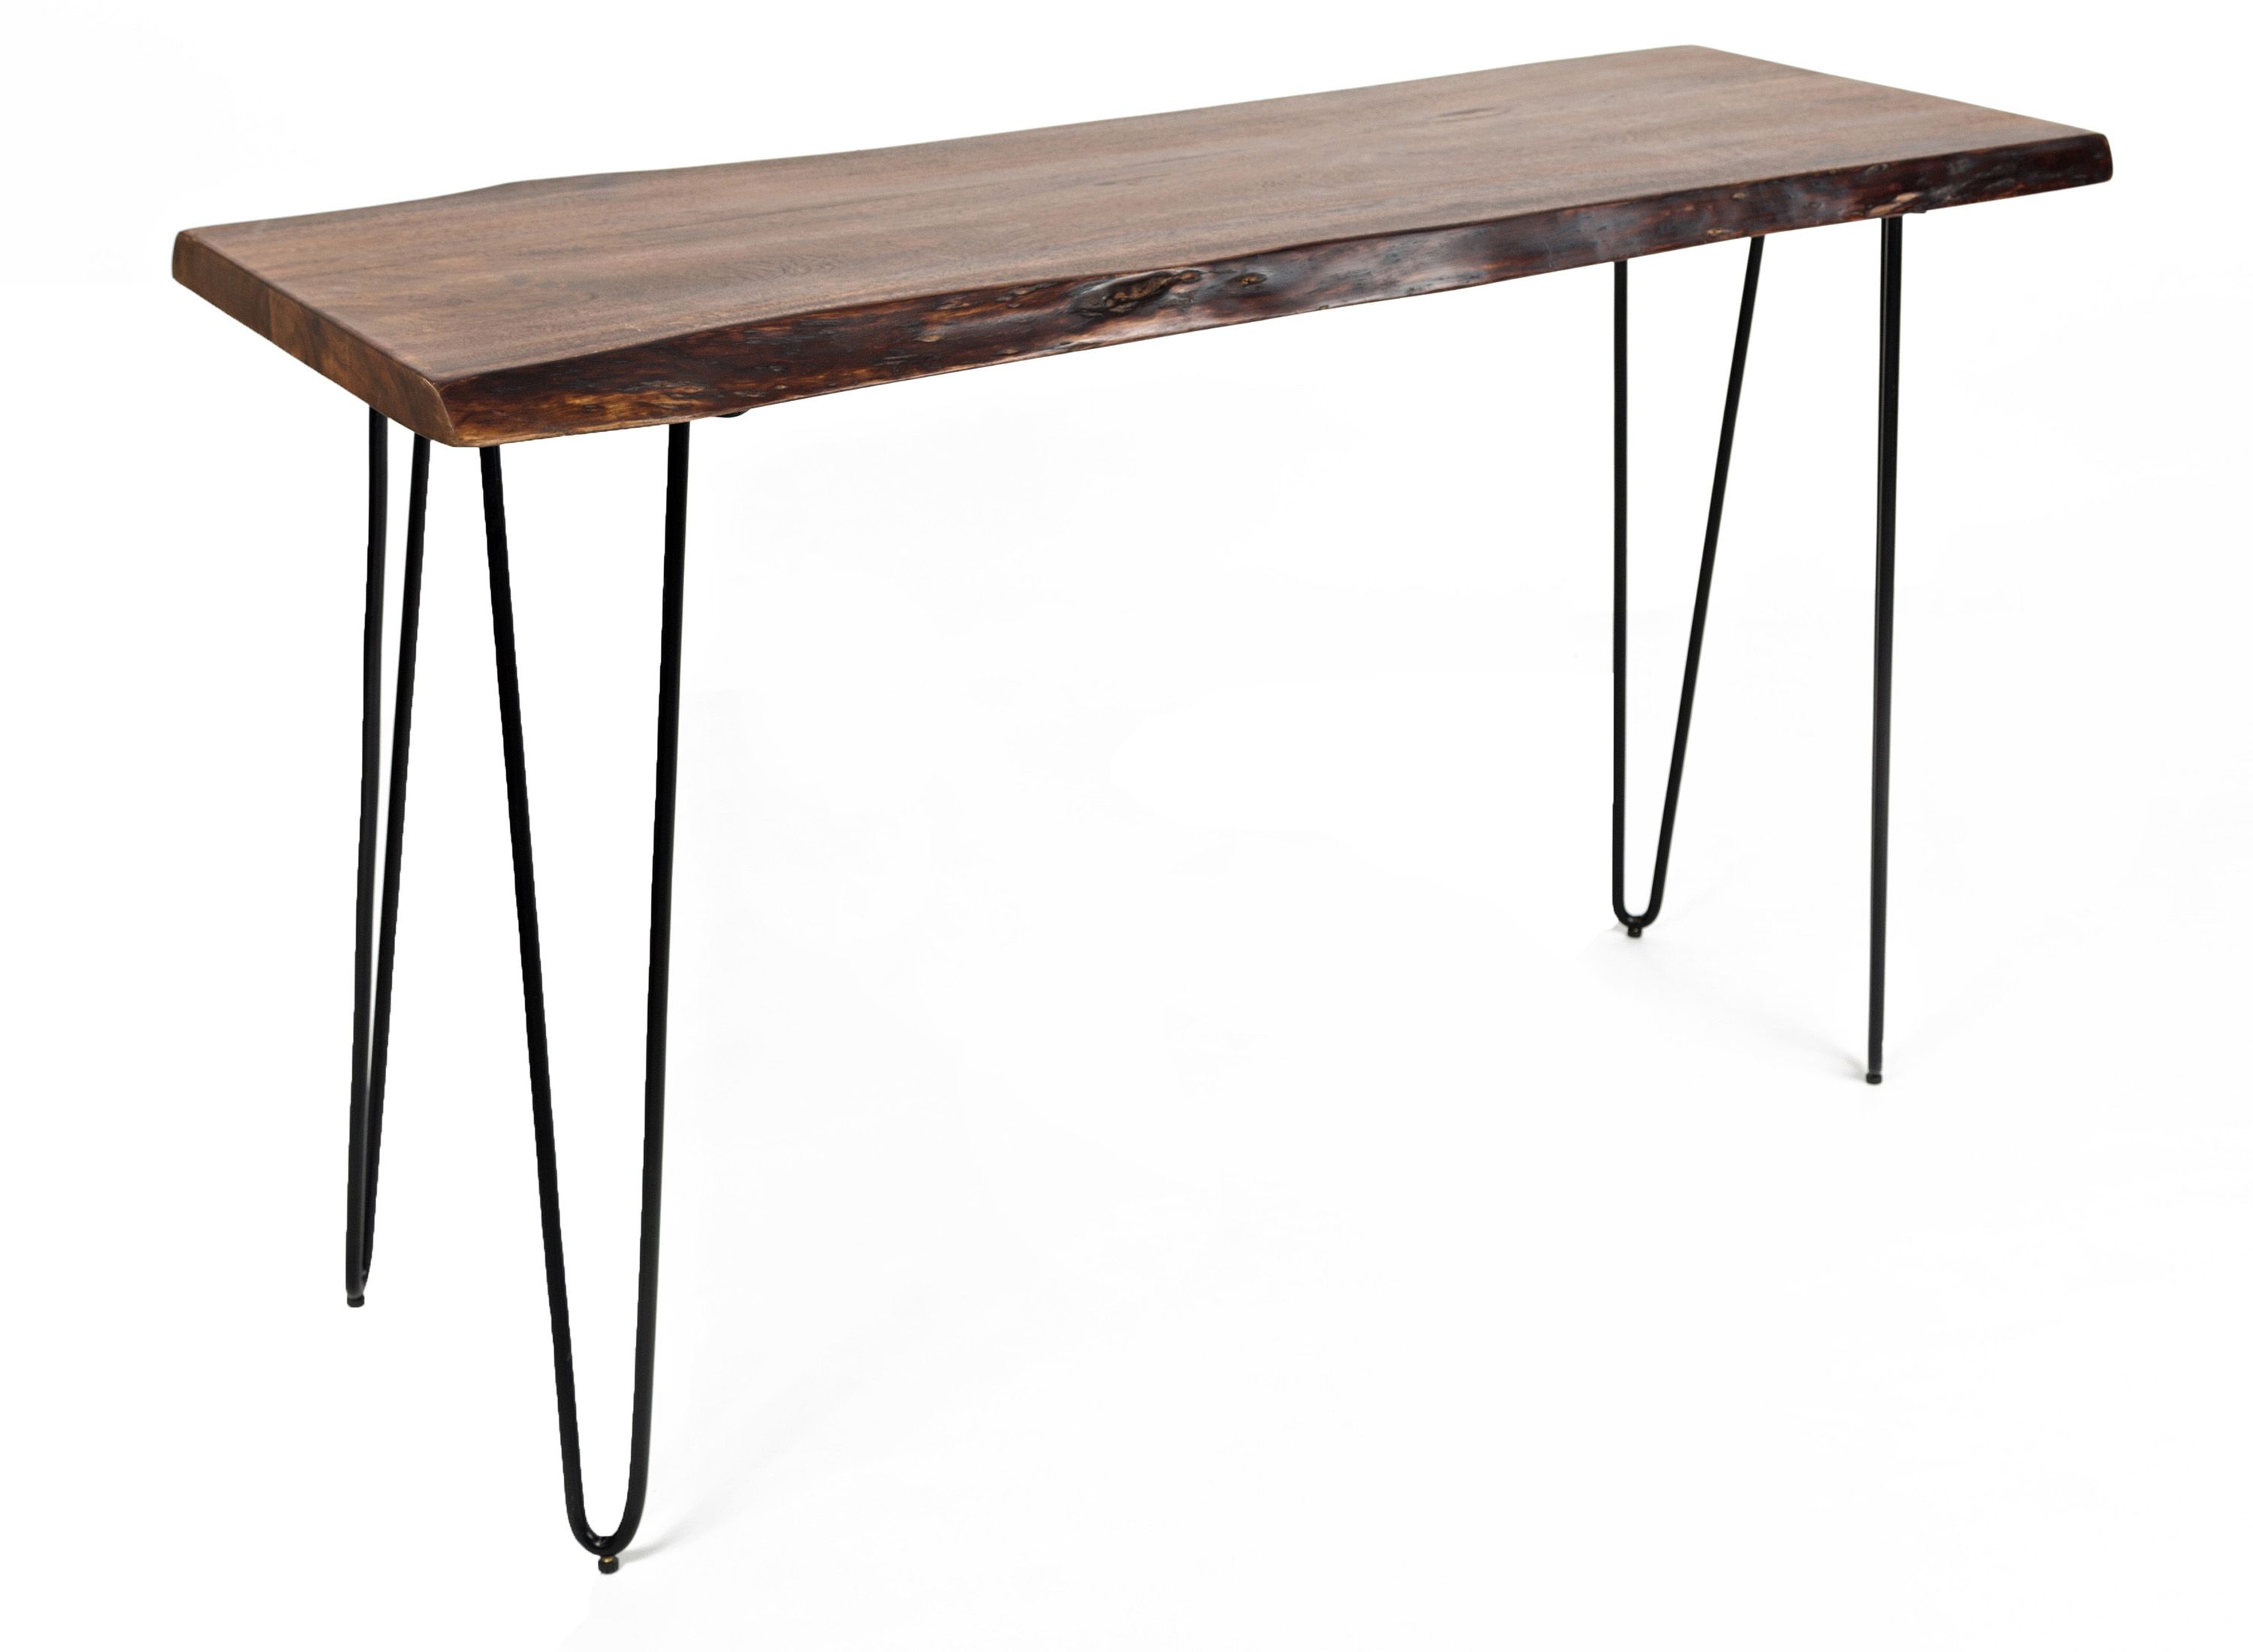 Nature's Live Edge Rectangular Console Table | Raymour & Flanigan